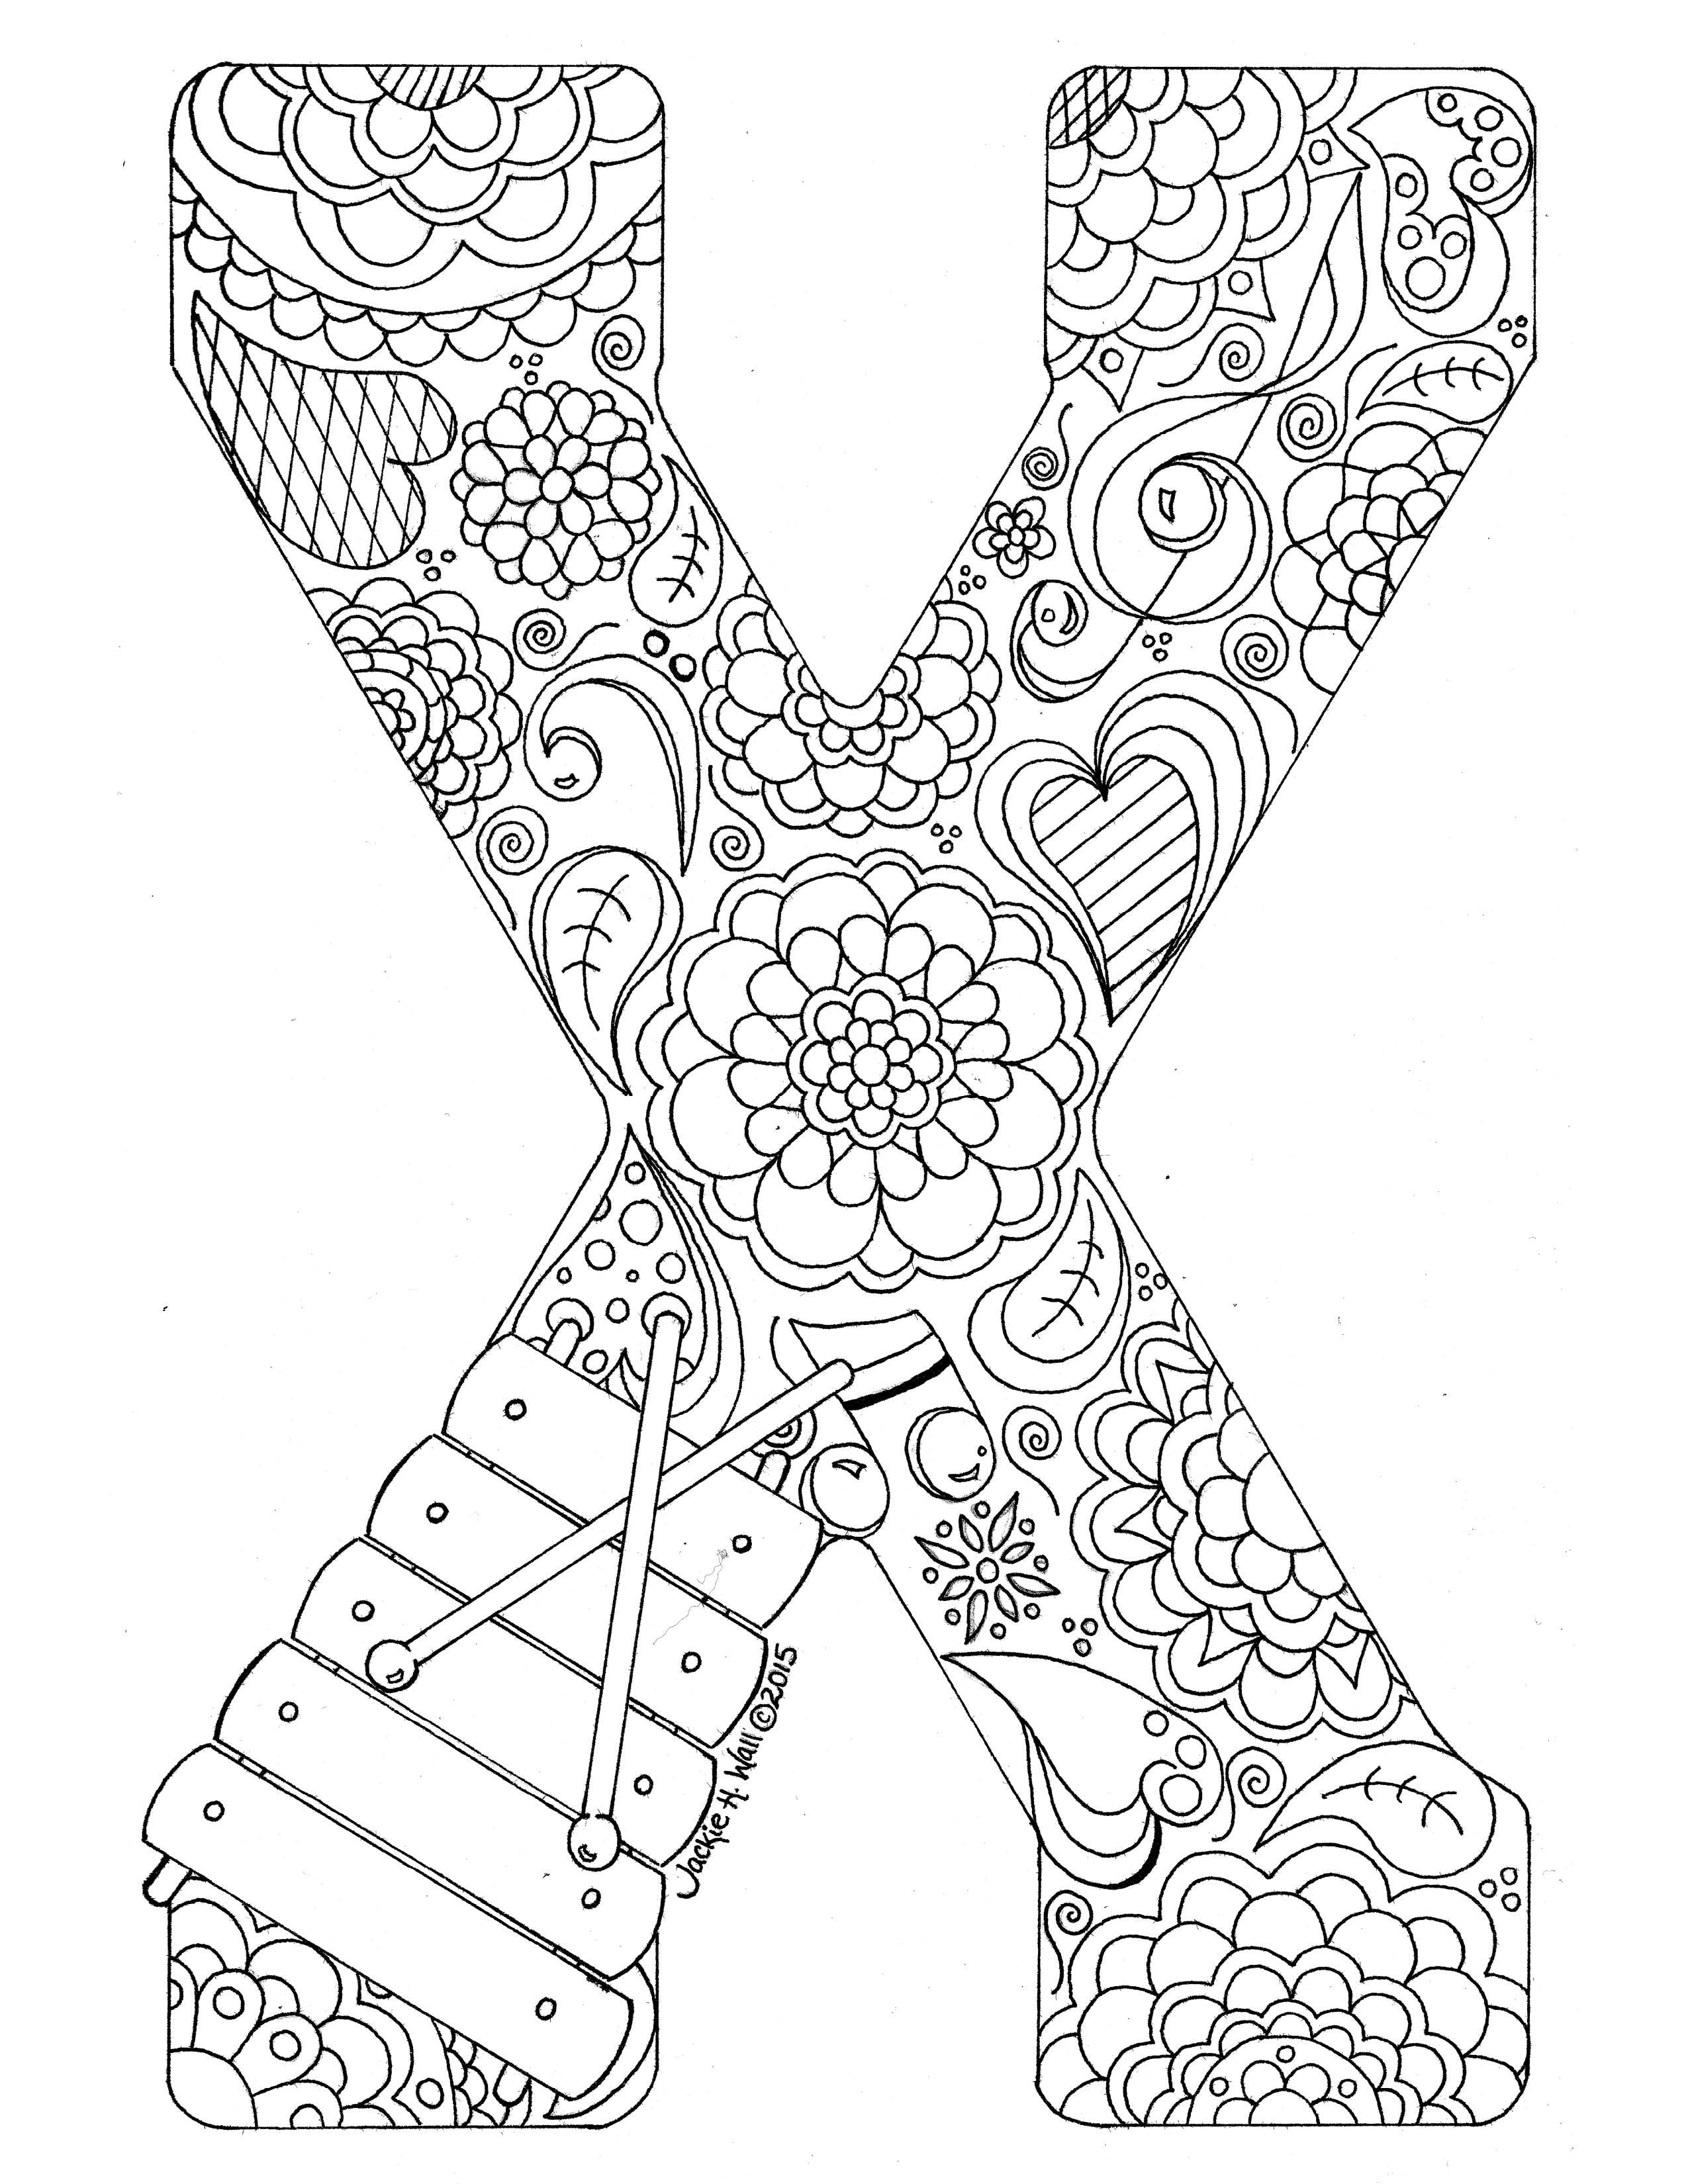 Letter X Colouring Page – Jackie Wall Studio